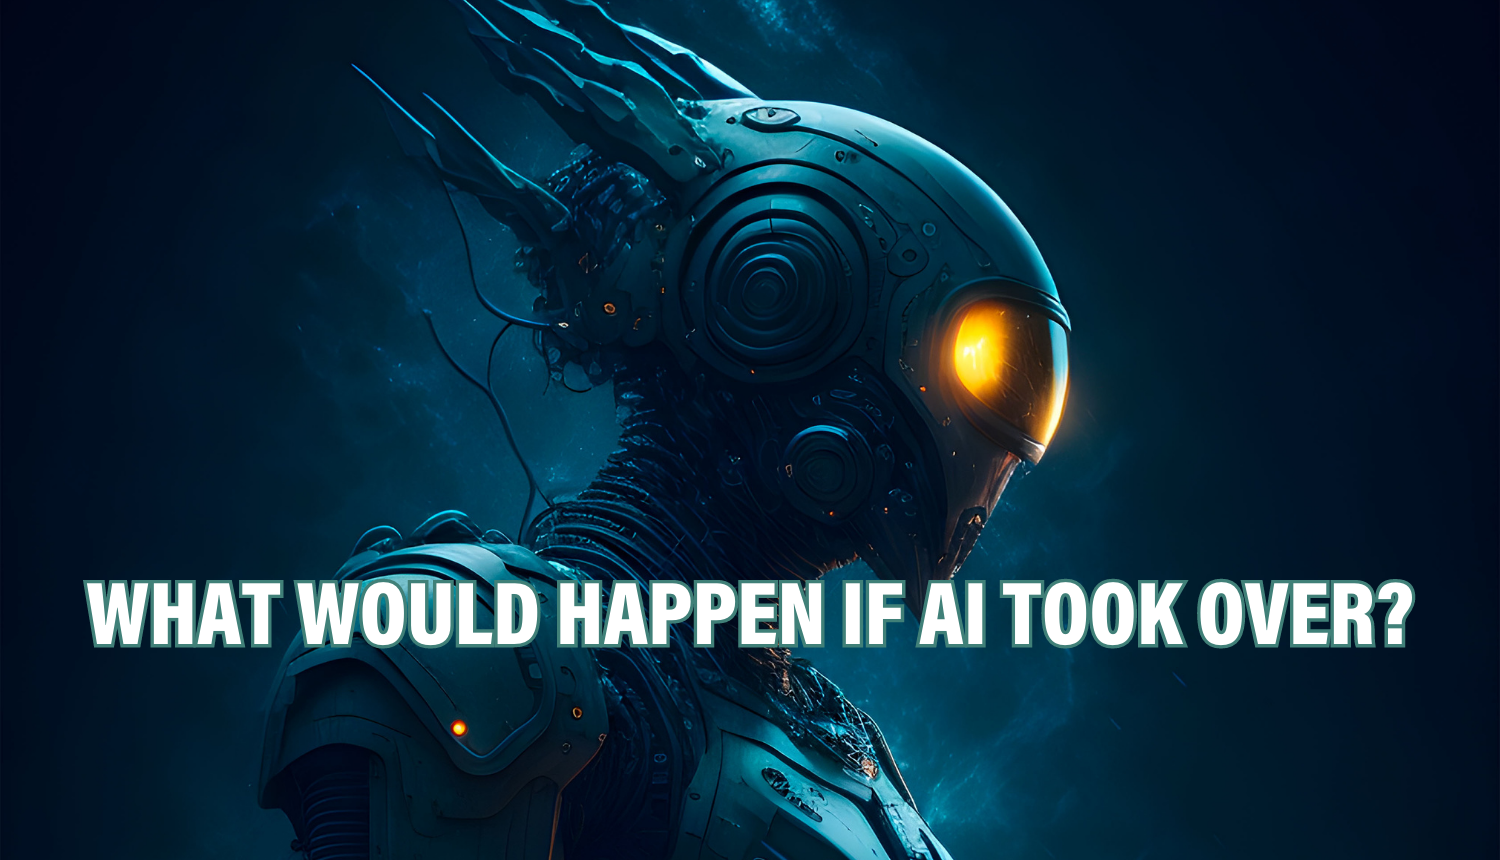 Let the almighty AI, do all the thinking for you